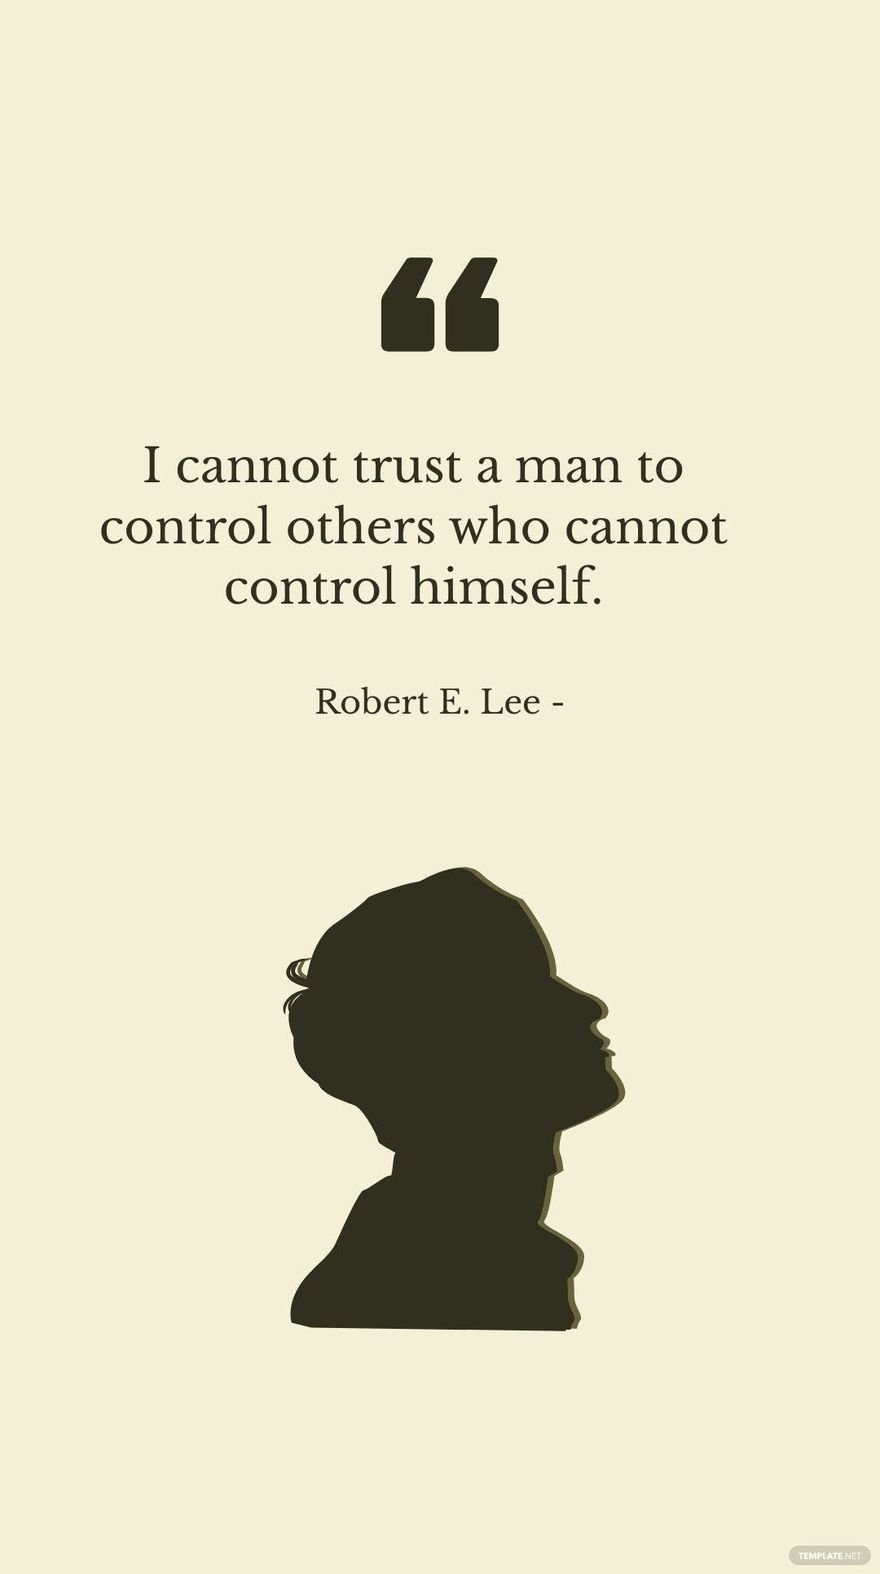 Robert E. Lee - I cannot trust a man to control others who cannot control himself.